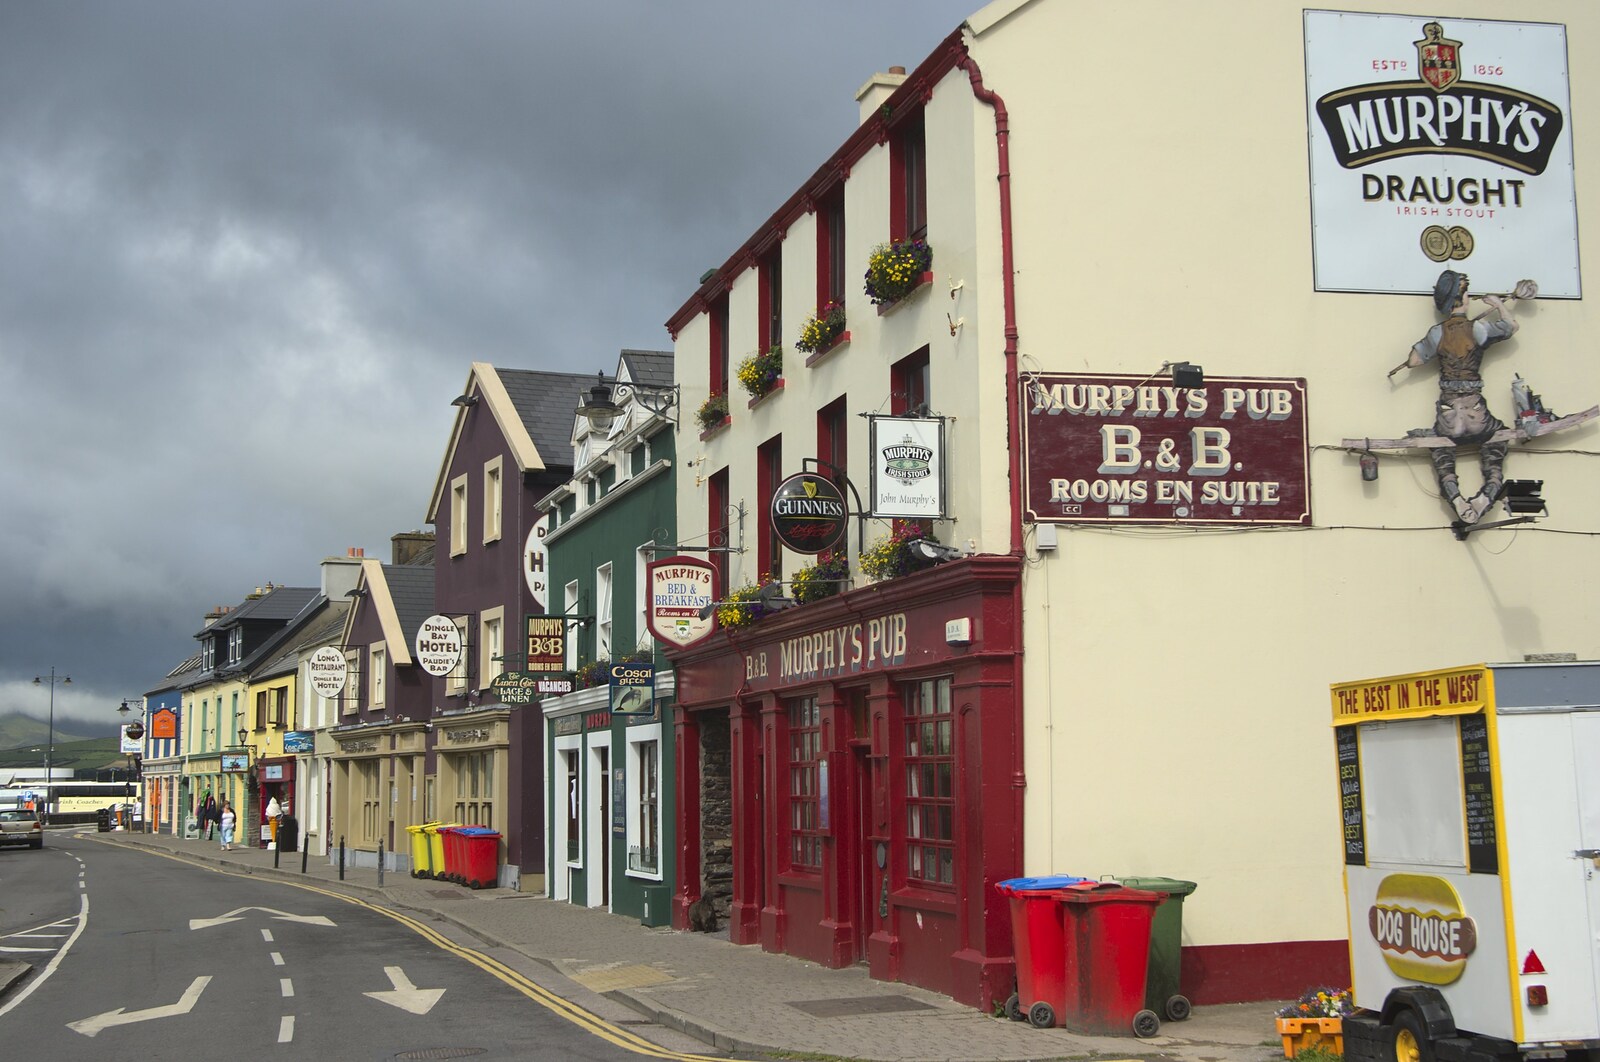 Brightly-painted buildings stand up to the ominous clouds from A Trip to Dingle, County Kerry, Ireland - 21st July 2009